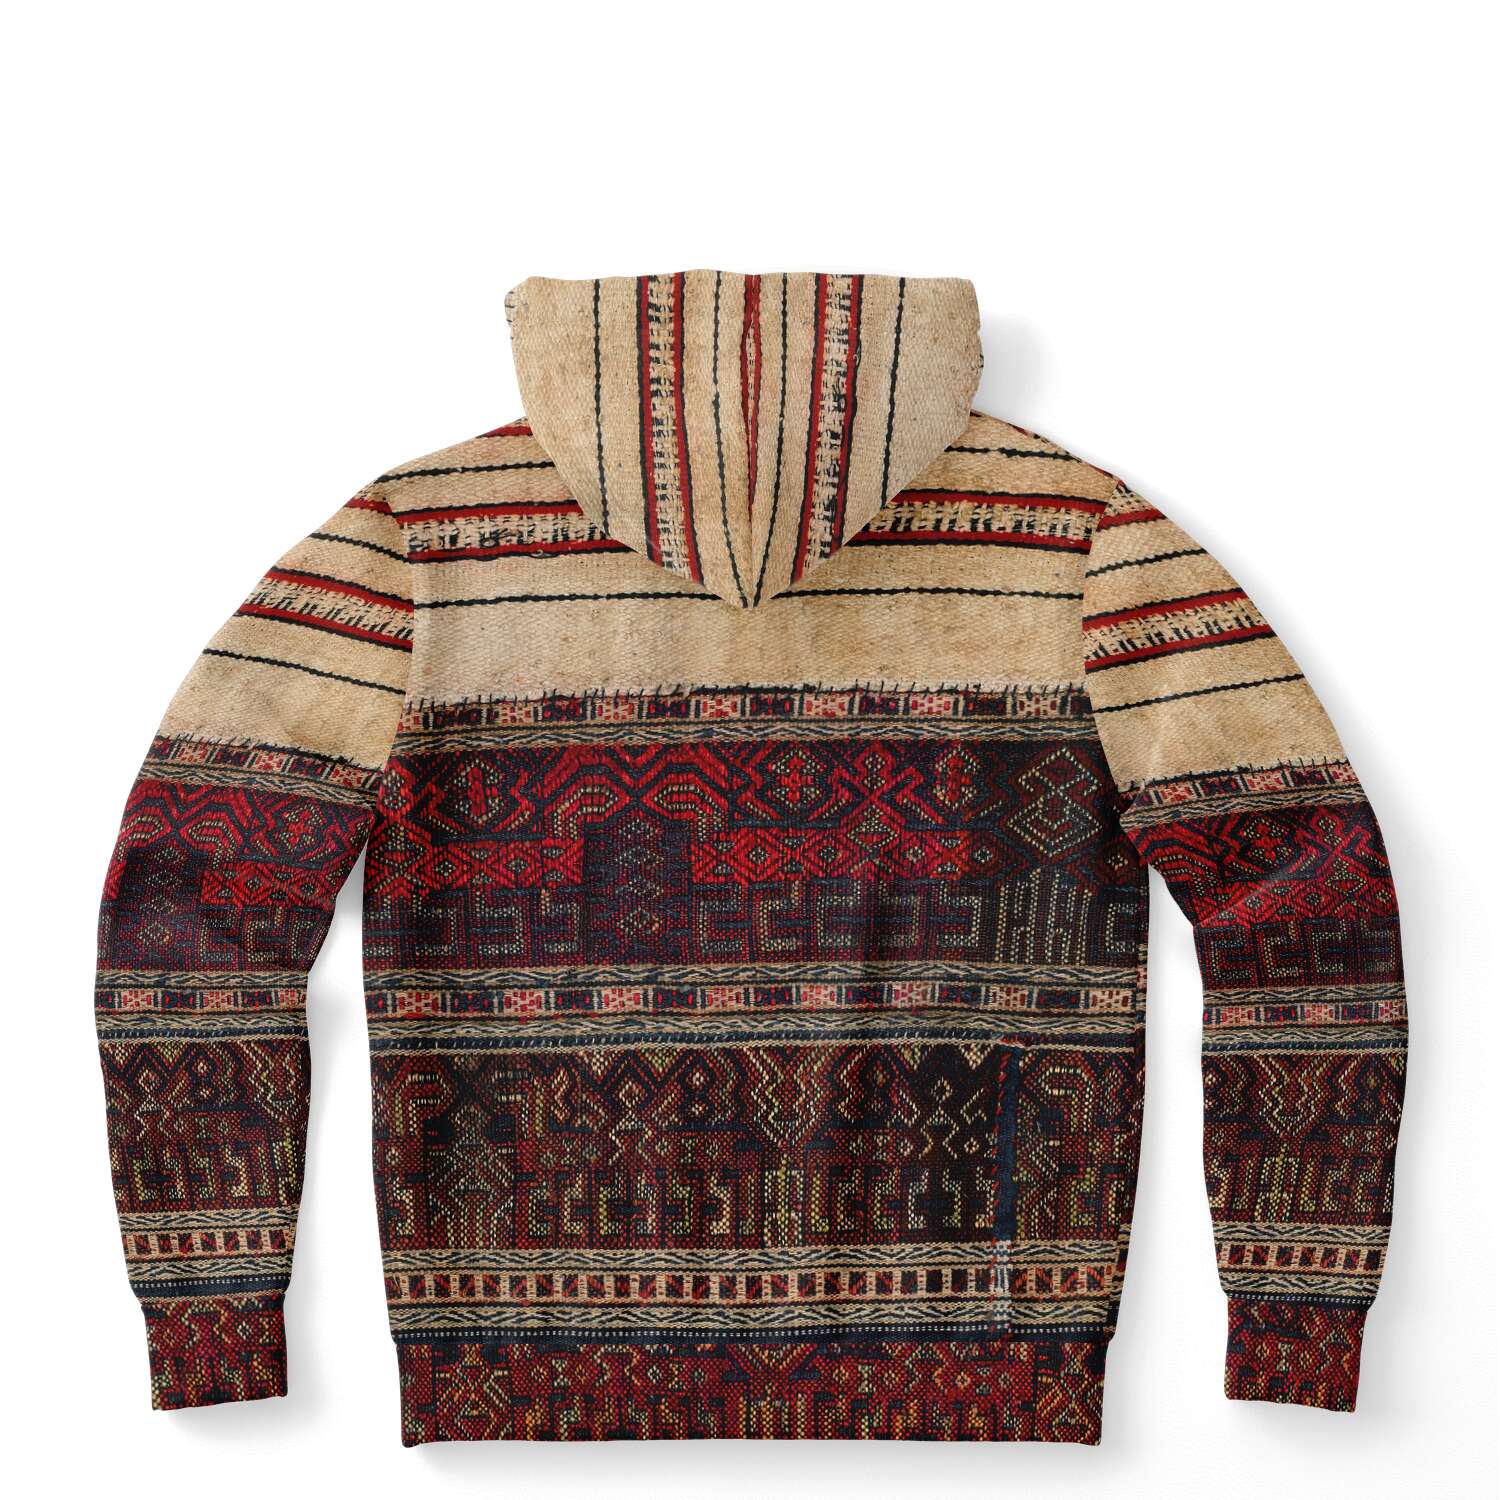 Fashion Hoodie - AOP Li Tribe Inspired Hoodie, Traditional World Style, Ethnic Asian Boho Textile Chinese Kilim Unisex Jacket Tribal Pullover Hoodie